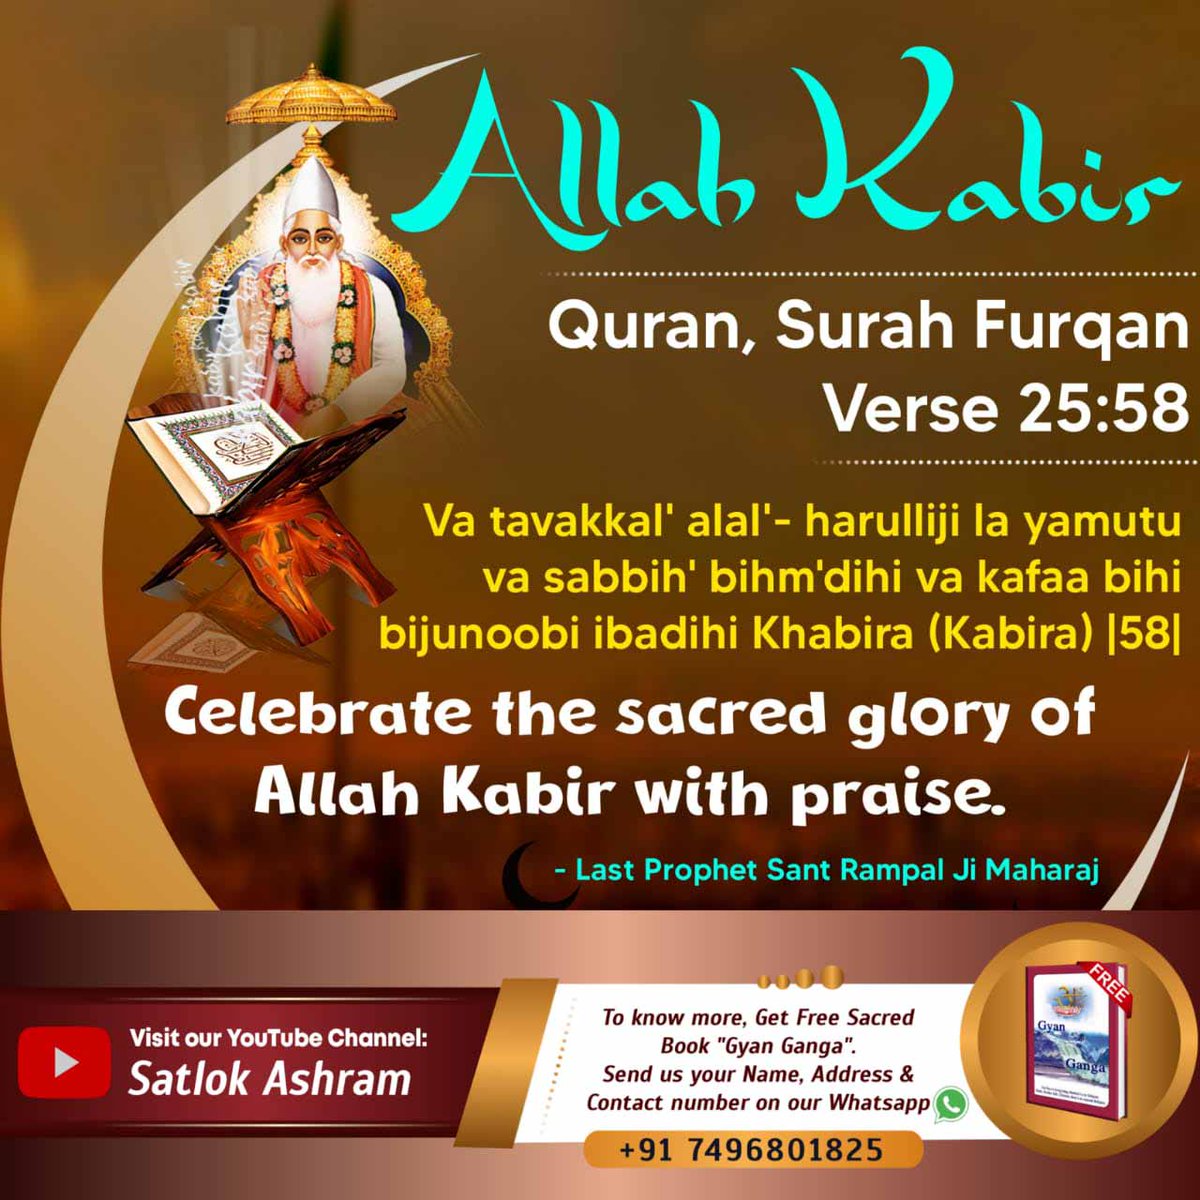 The Secret of the Holy Quran Sharif: Complete Allah Is Different From the Knowledge-Giver of Holy Quran.

#Allah_Is_Kabir
Baakhabar Sant Rampal Ji Maharaj